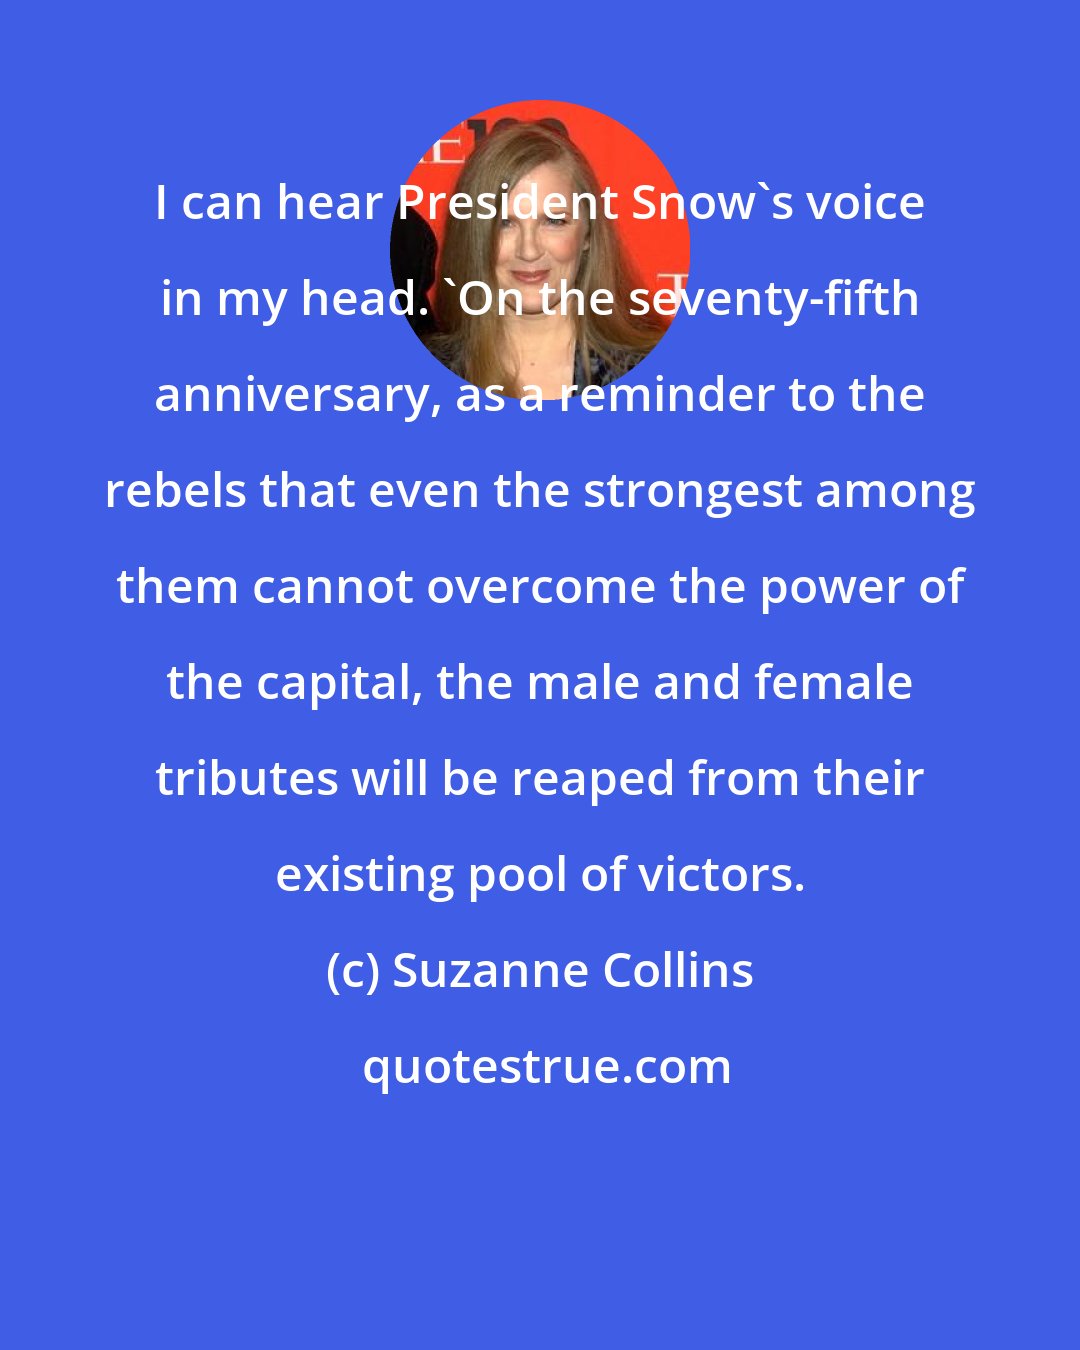 Suzanne Collins: I can hear President Snow's voice in my head. 'On the seventy-fifth anniversary, as a reminder to the rebels that even the strongest among them cannot overcome the power of the capital, the male and female tributes will be reaped from their existing pool of victors.